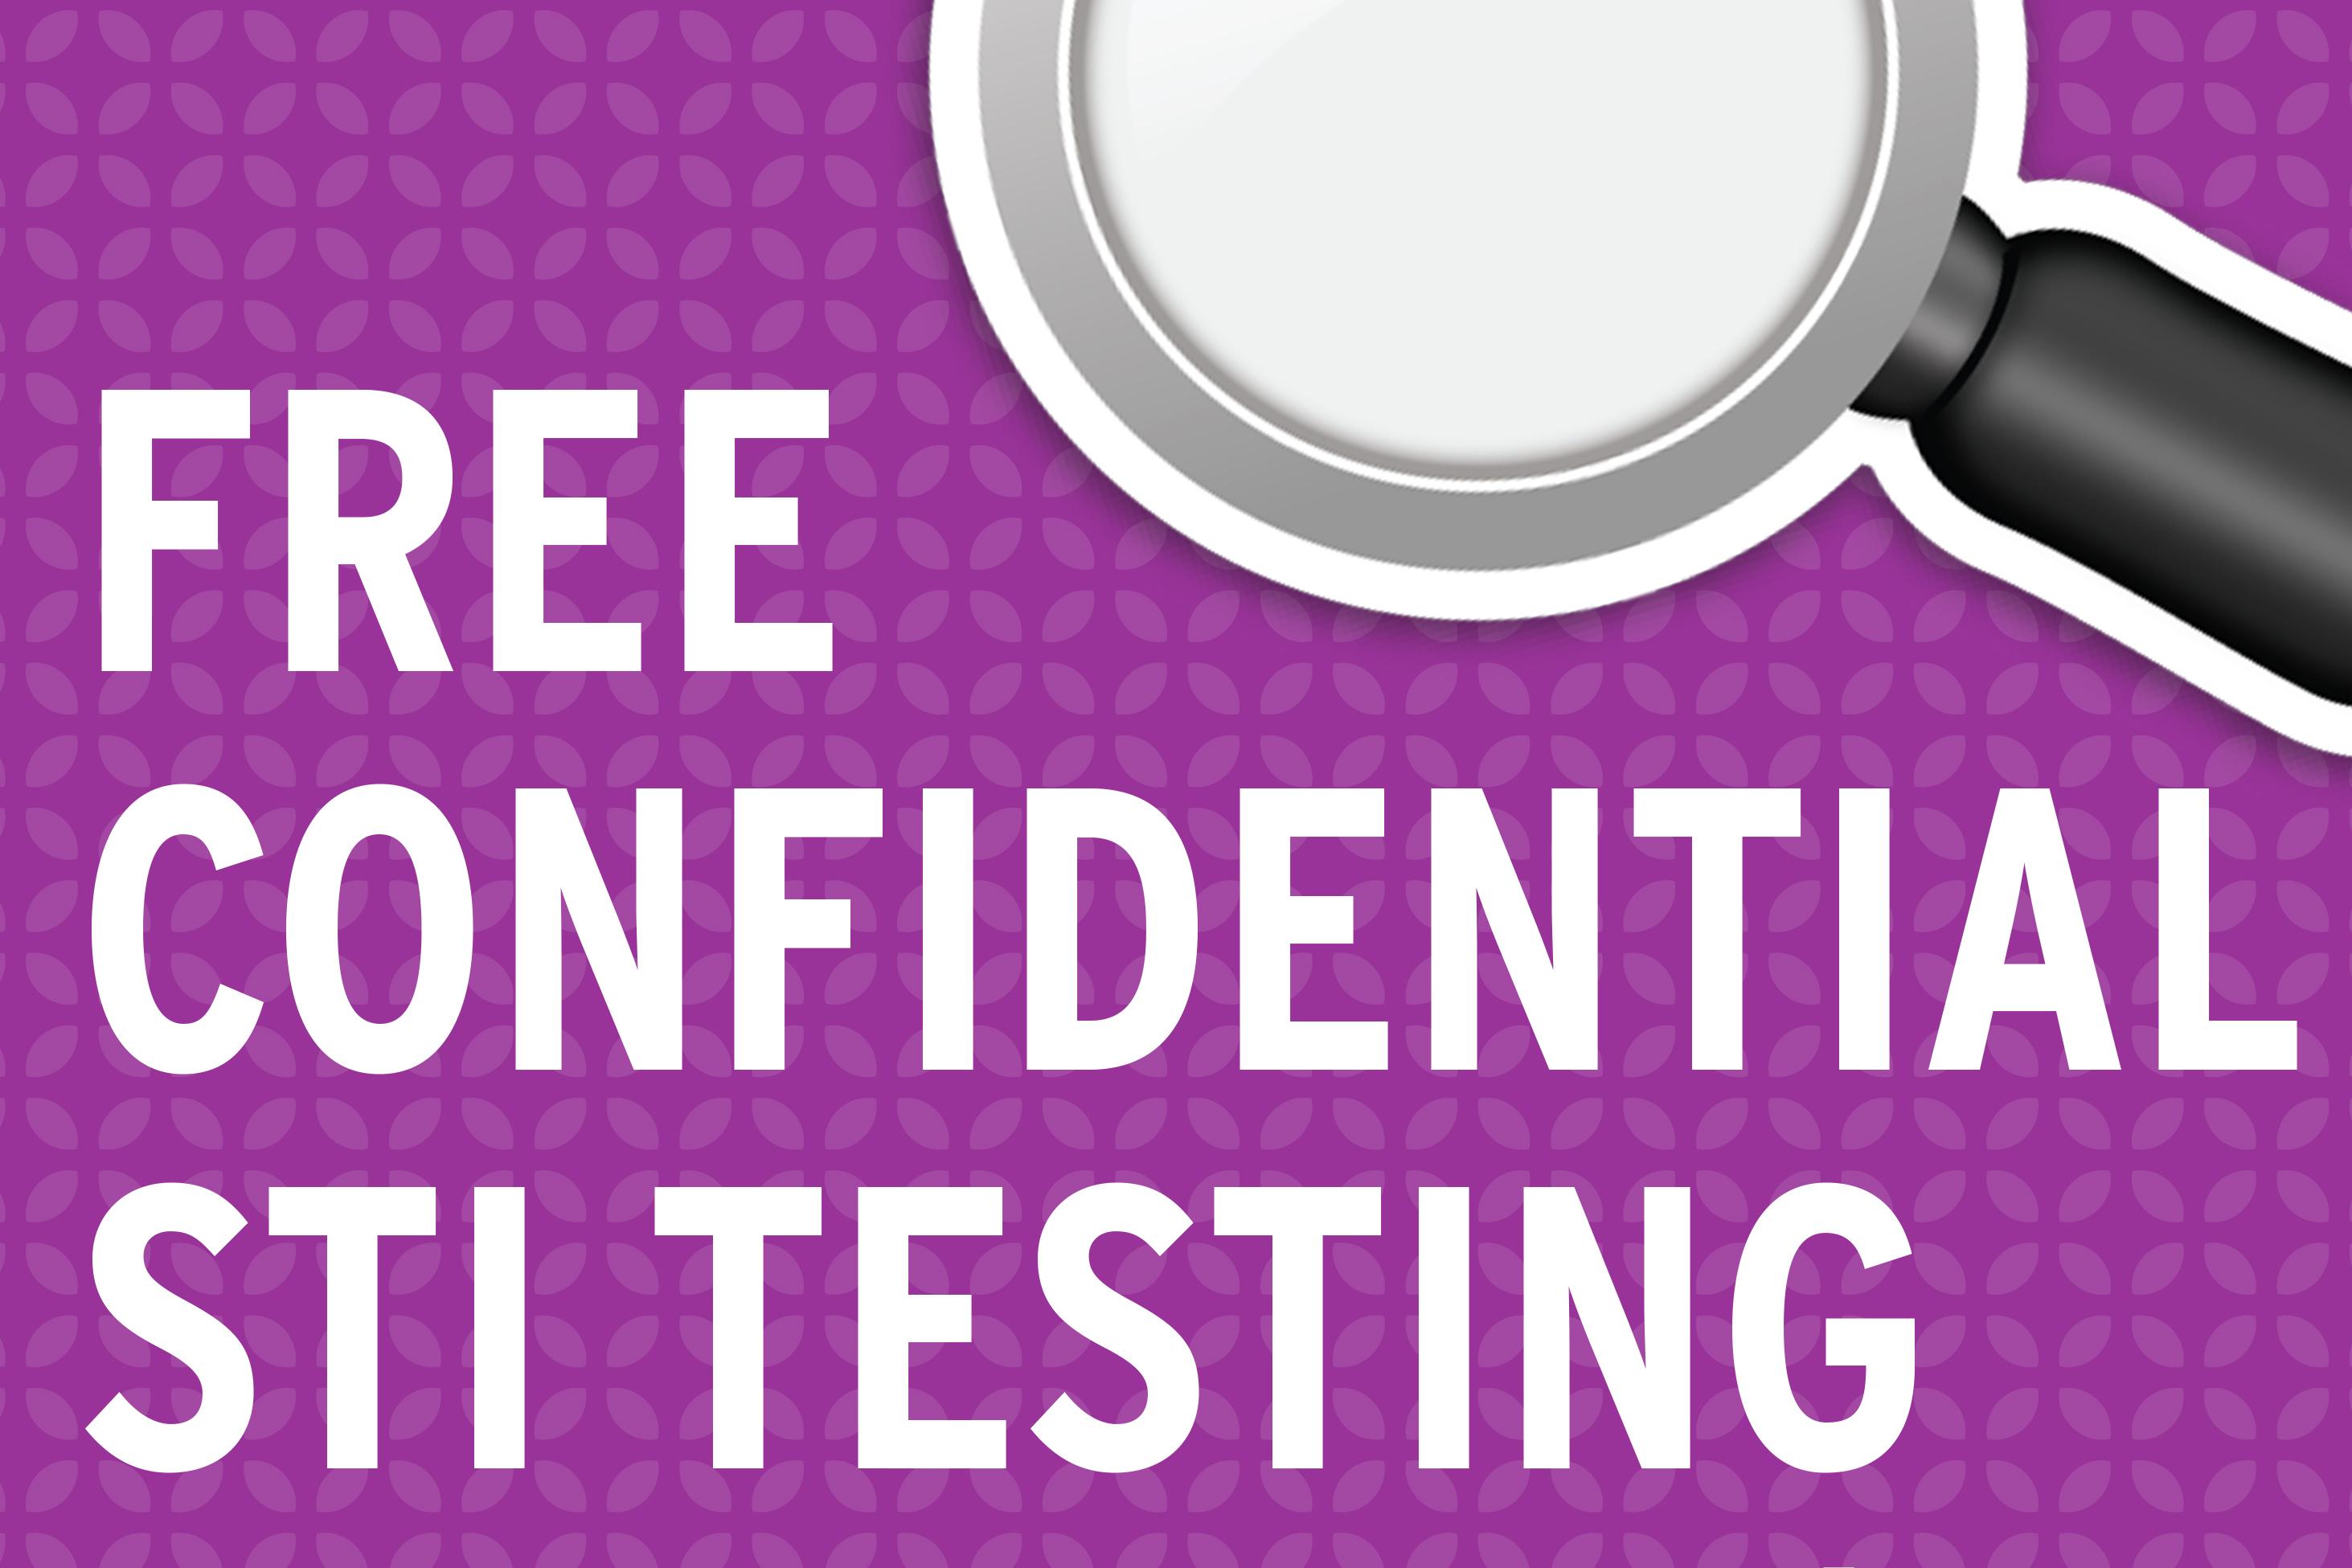 DuWell is bringing in Durham County Public Health department to do free, confidential STI testing in the Wellness Center to help make STI screening even more convenient and accessible for students.  Location: Room 150